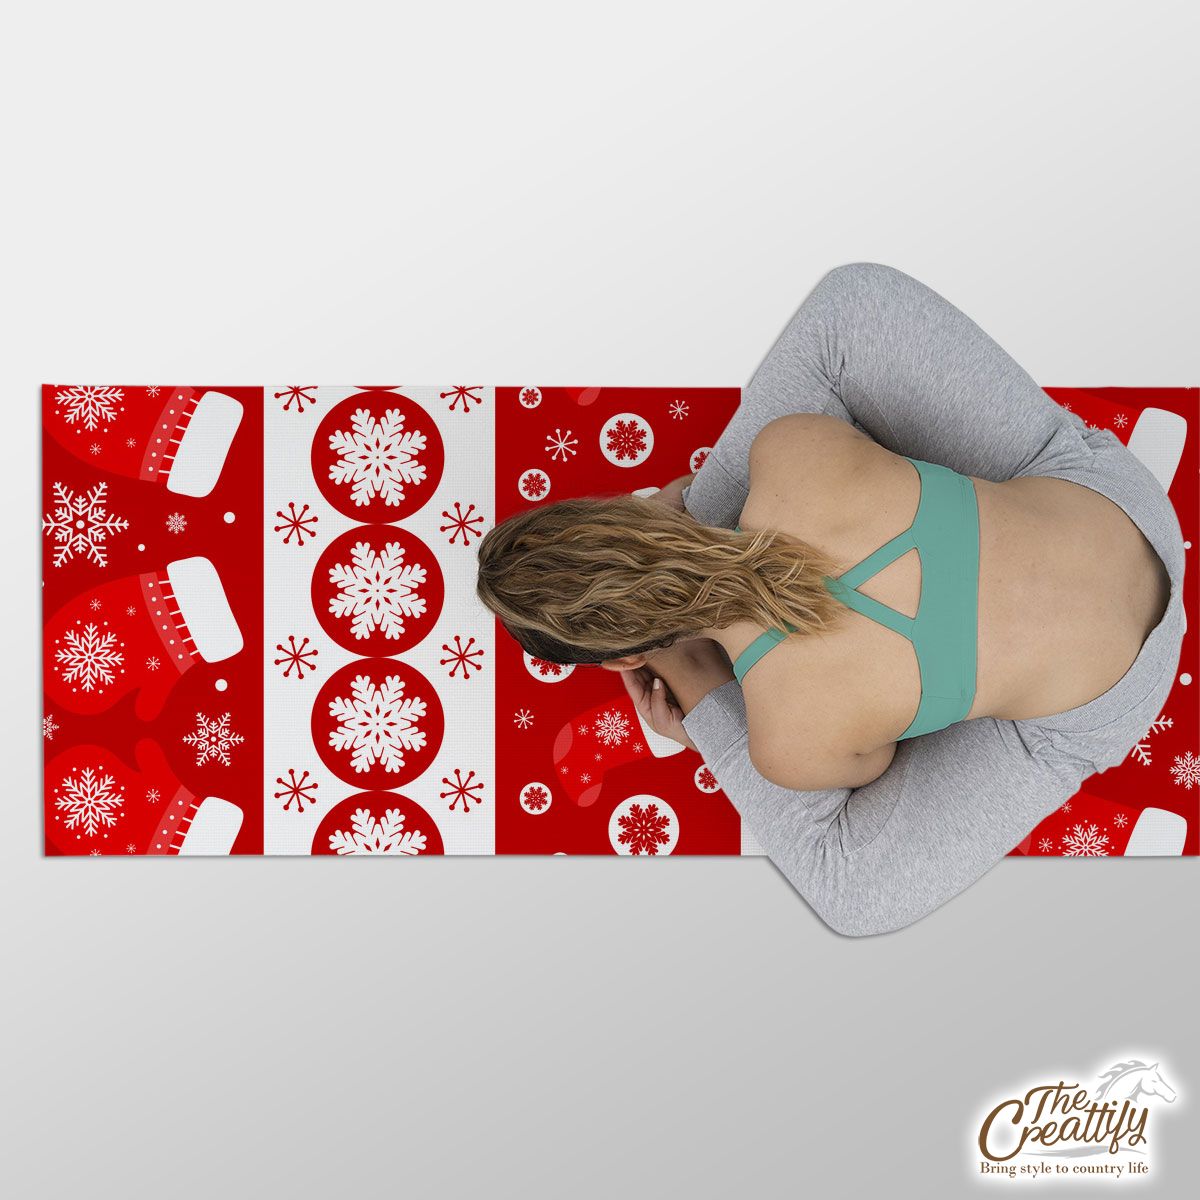 Christmas Wool Gloves, Red Socks And Snowflake Red Pattern Yoga Mat